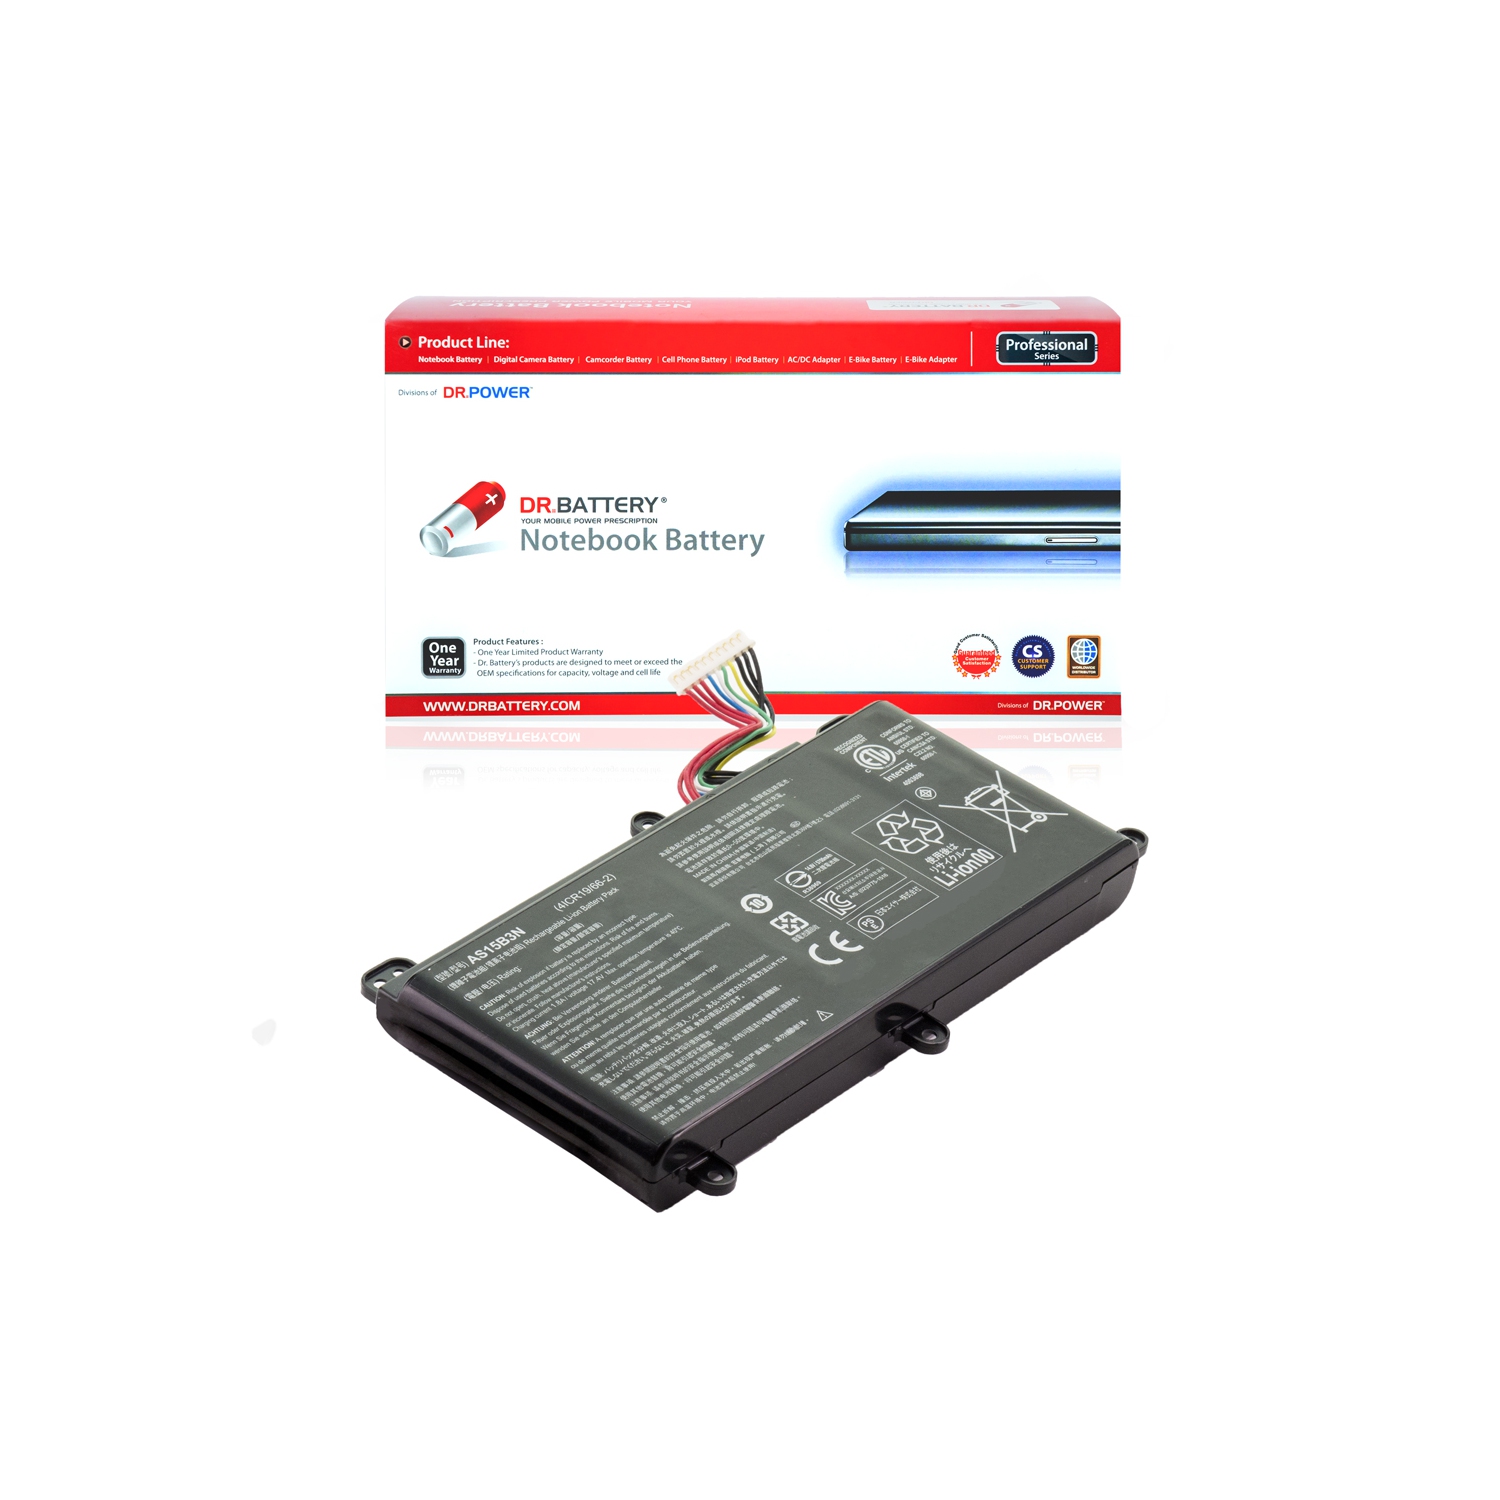 DR. BATTERY - Replacement for Acer Predator 15 G9-591-74KN / G9-591-74ZV / G9-591-76FP / KT.00803.004 / KT.00803.005